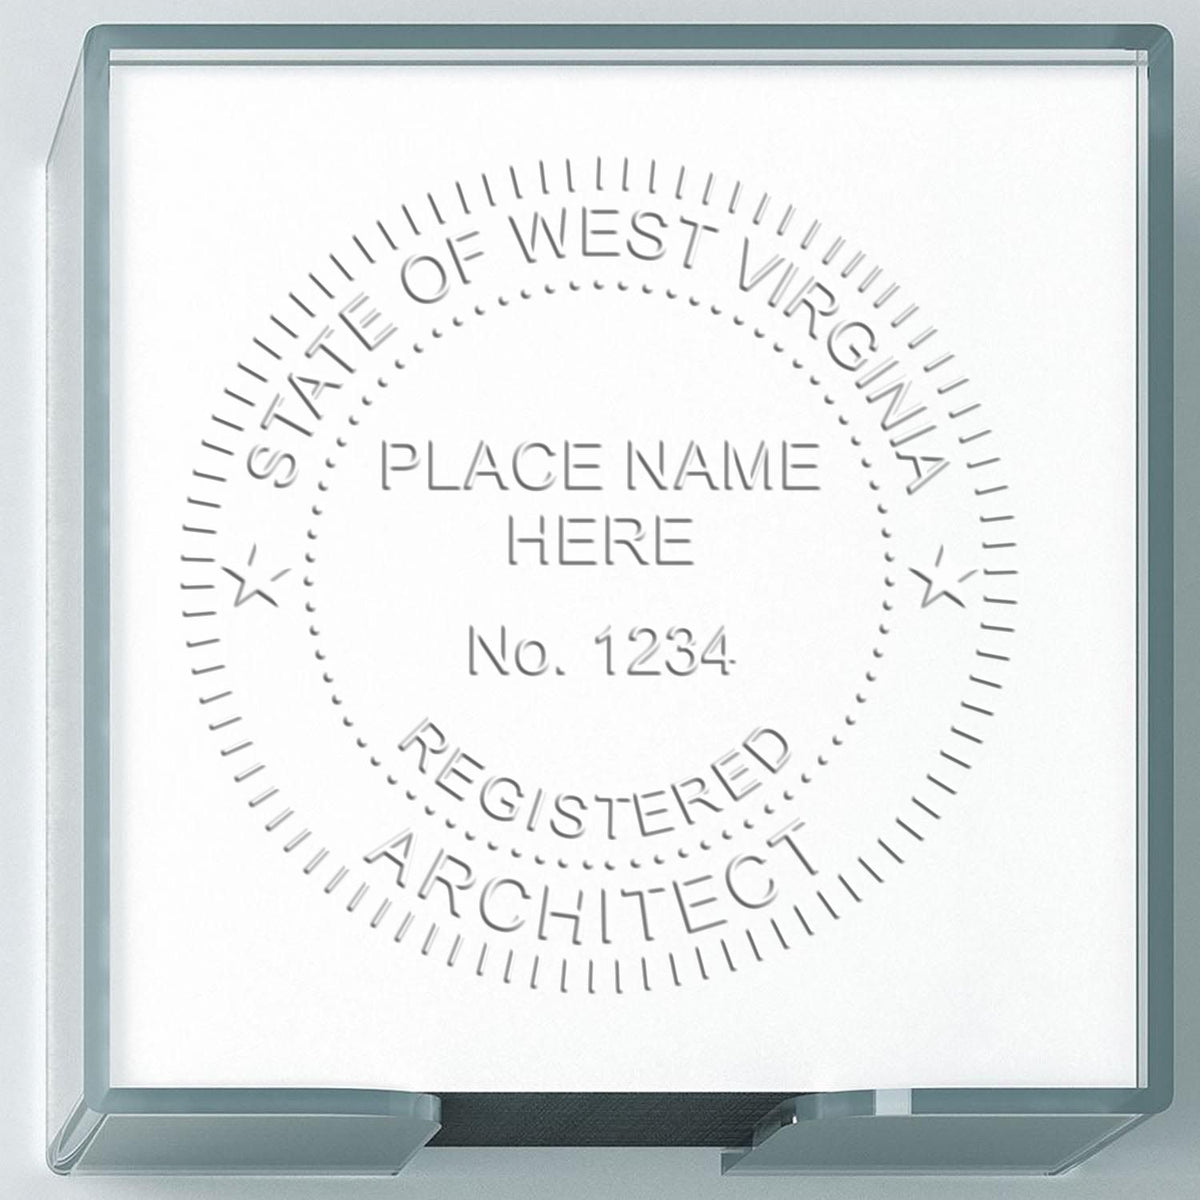 A stamped impression of the State of West Virginia Architectural Seal Embosser in this stylish lifestyle photo, setting the tone for a unique and personalized product.